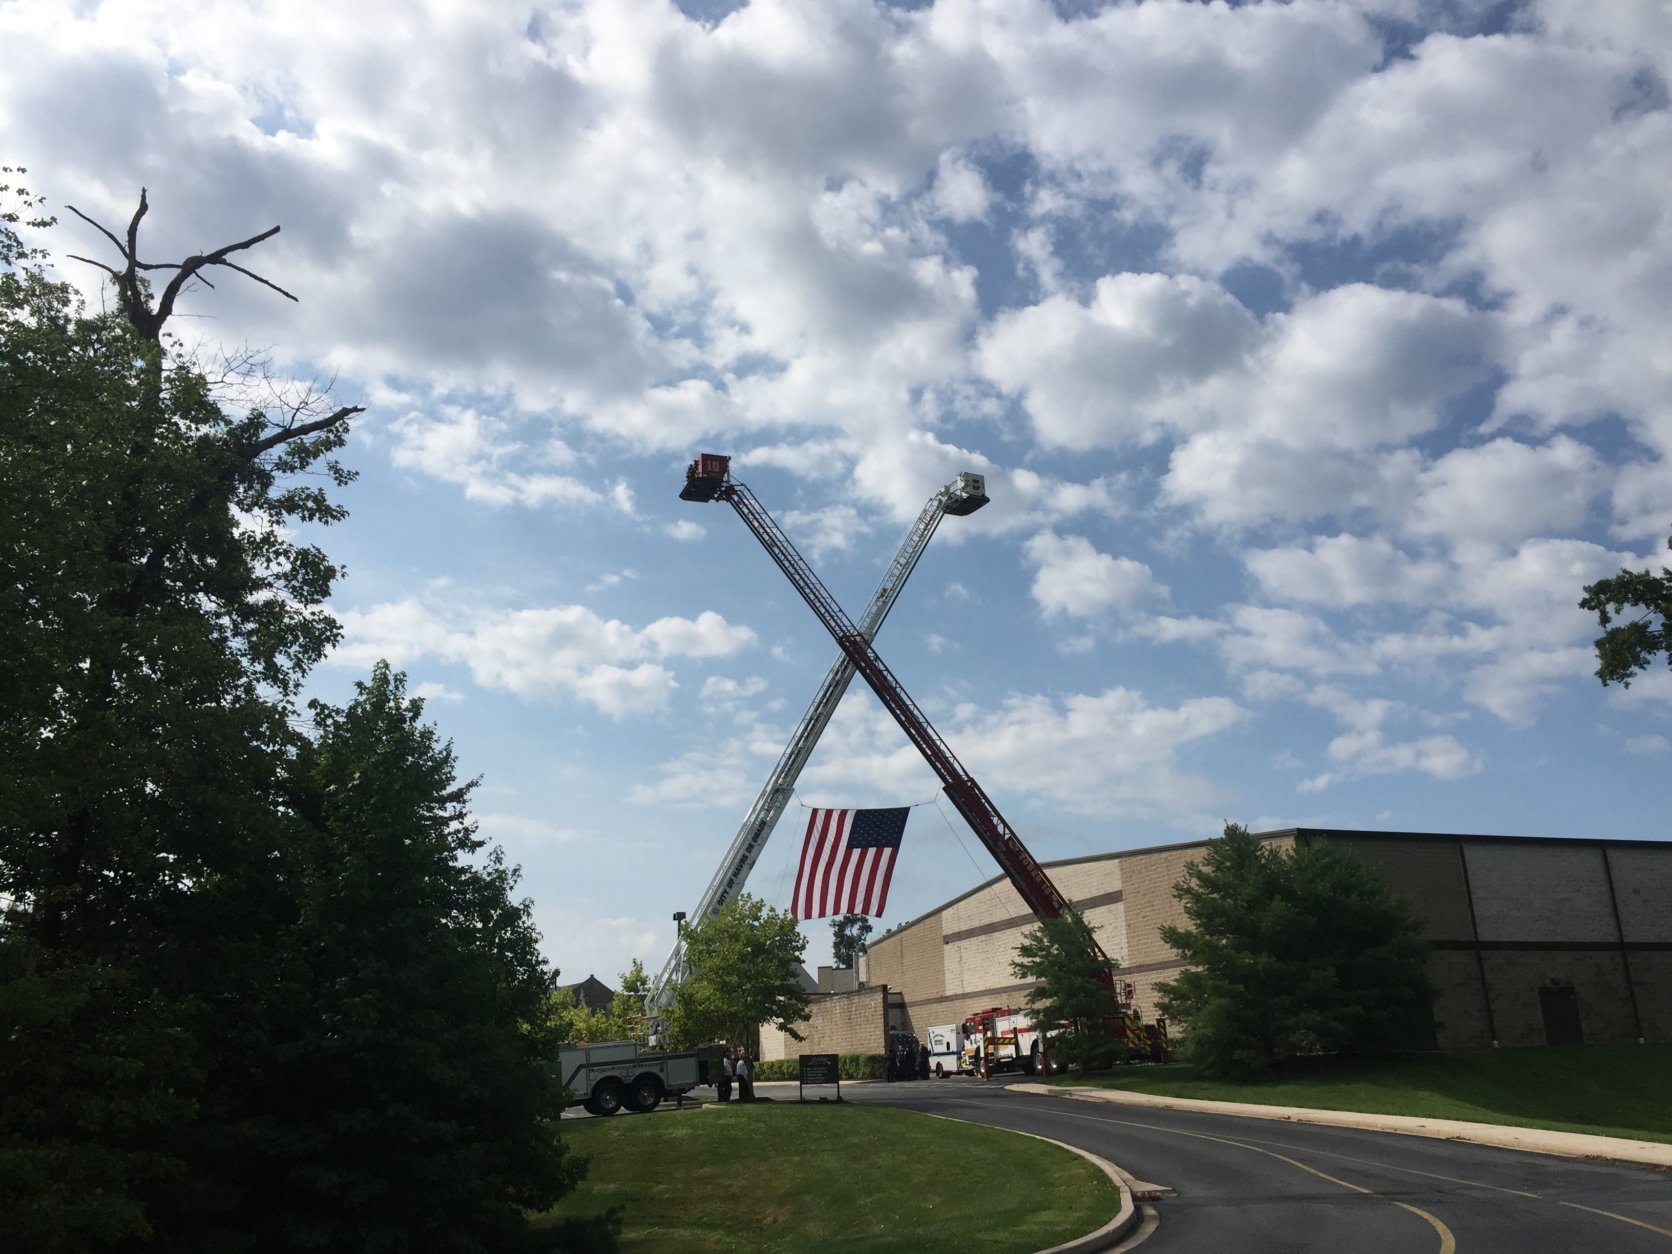 When Howard County Fire Engine 101 pulled into the parking lot of the Mountain Christian Church in Joppa, Maryland, it went under a large American flag held up by two ladder trucks. (WTOP/Mike Murillo)